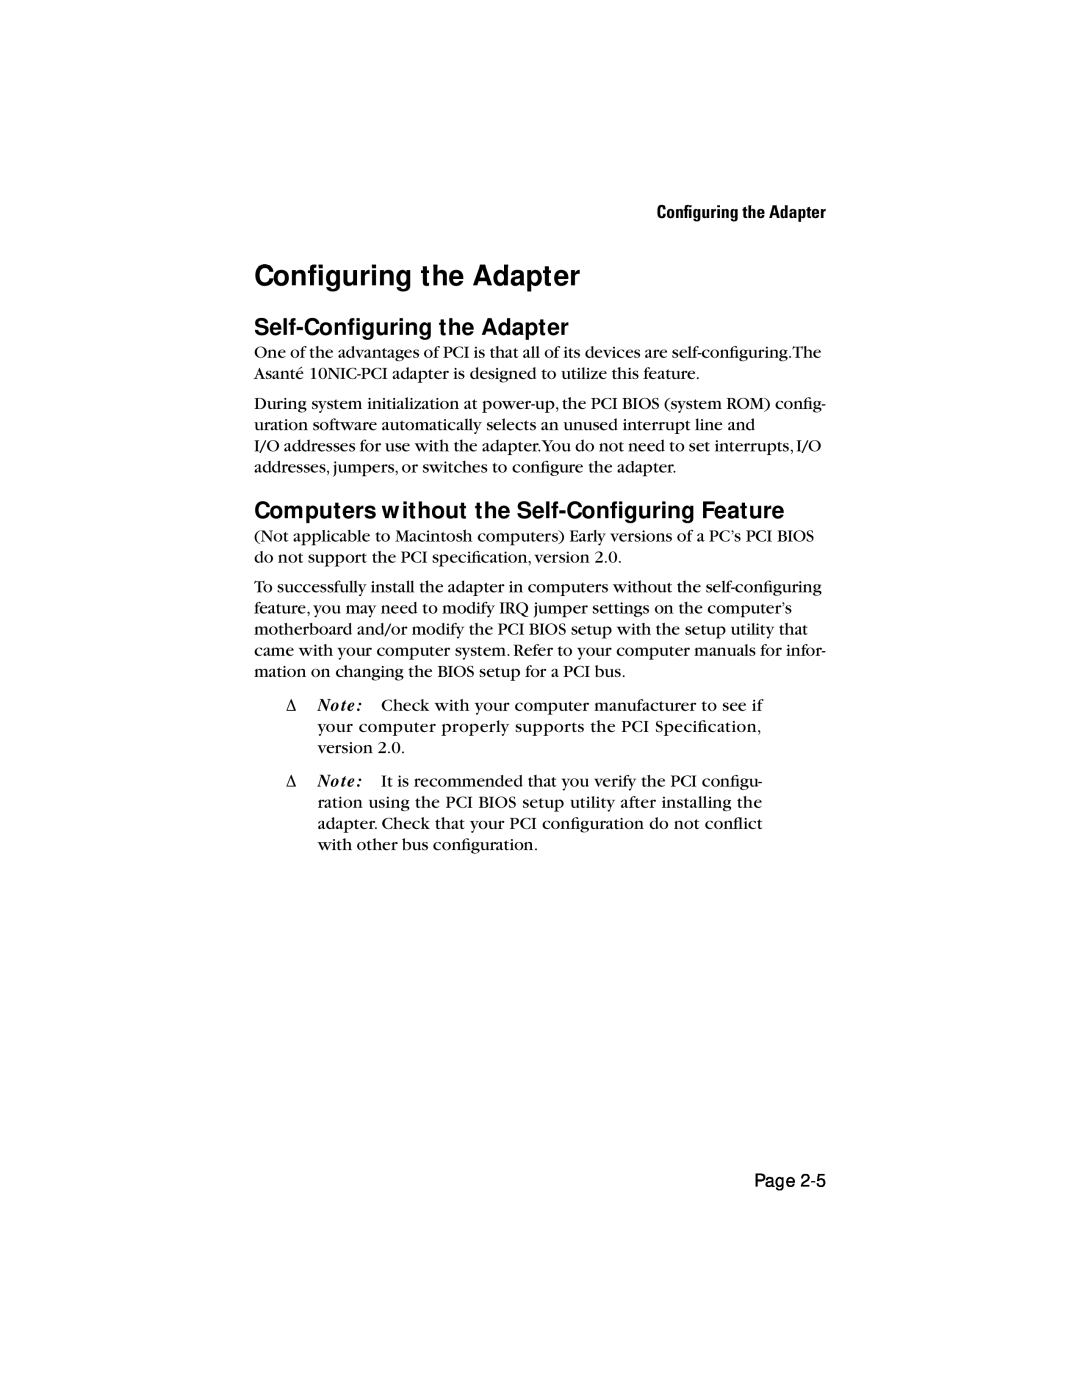 Asante Technologies 10NIC-PCITM manual Self-Conﬁguring the Adapter, Computers without the Self-Conﬁguring Feature 